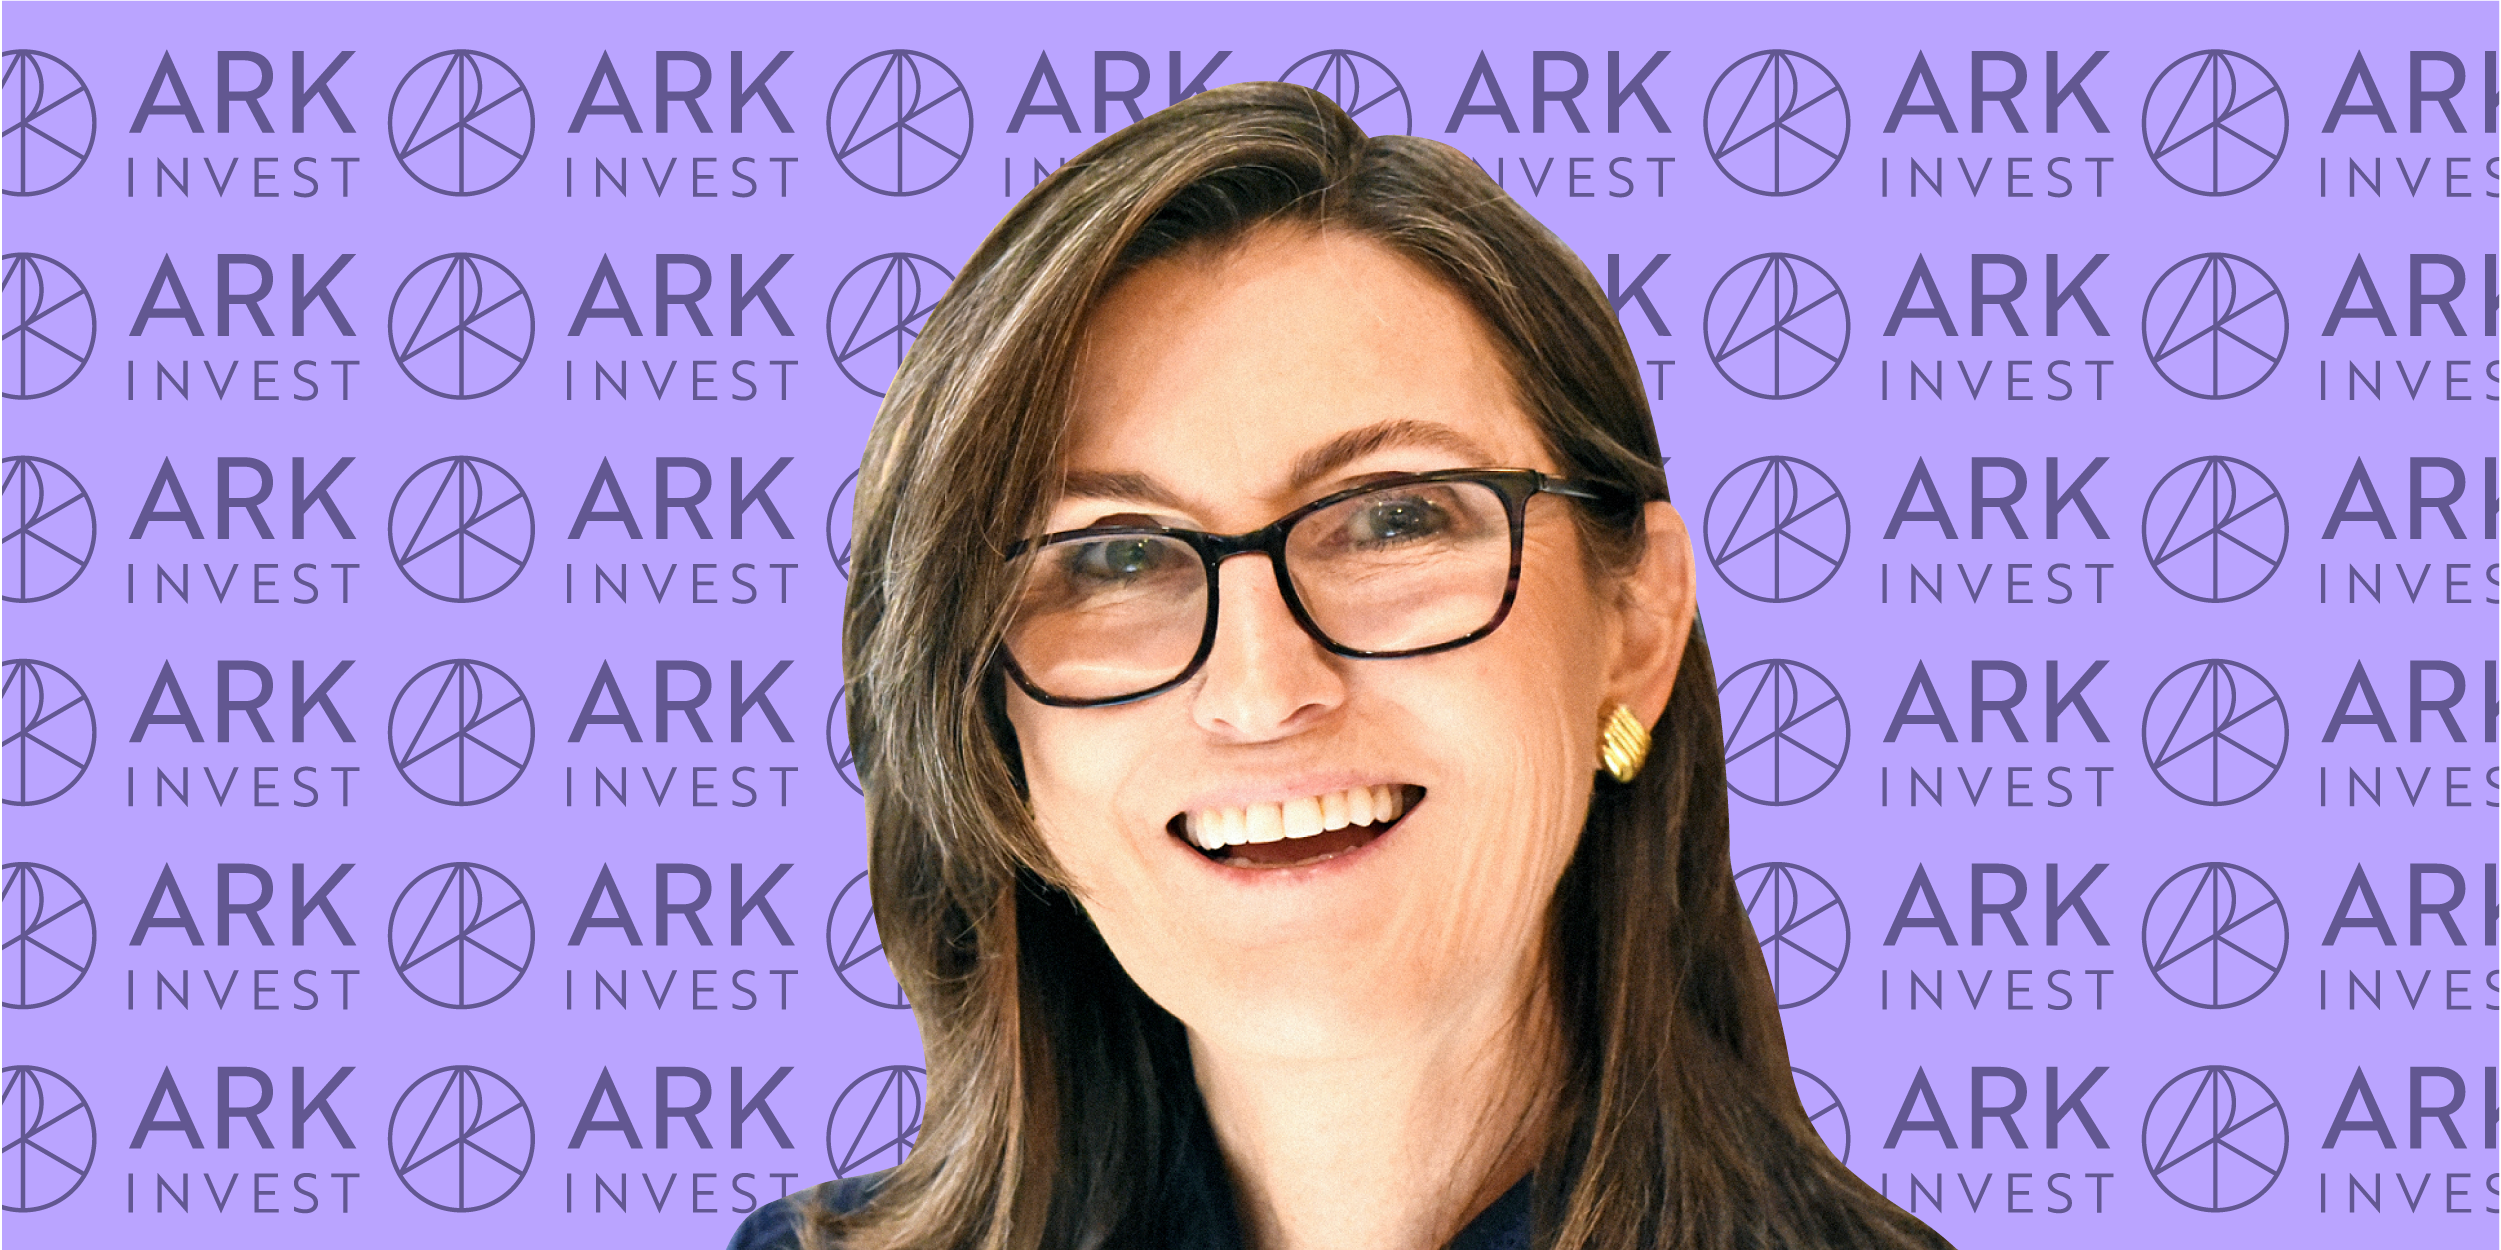 Cathie Wood, CEO and chief investment officer of ARK Invest, on a purple background with the Ark Invest logos patterned behind her.